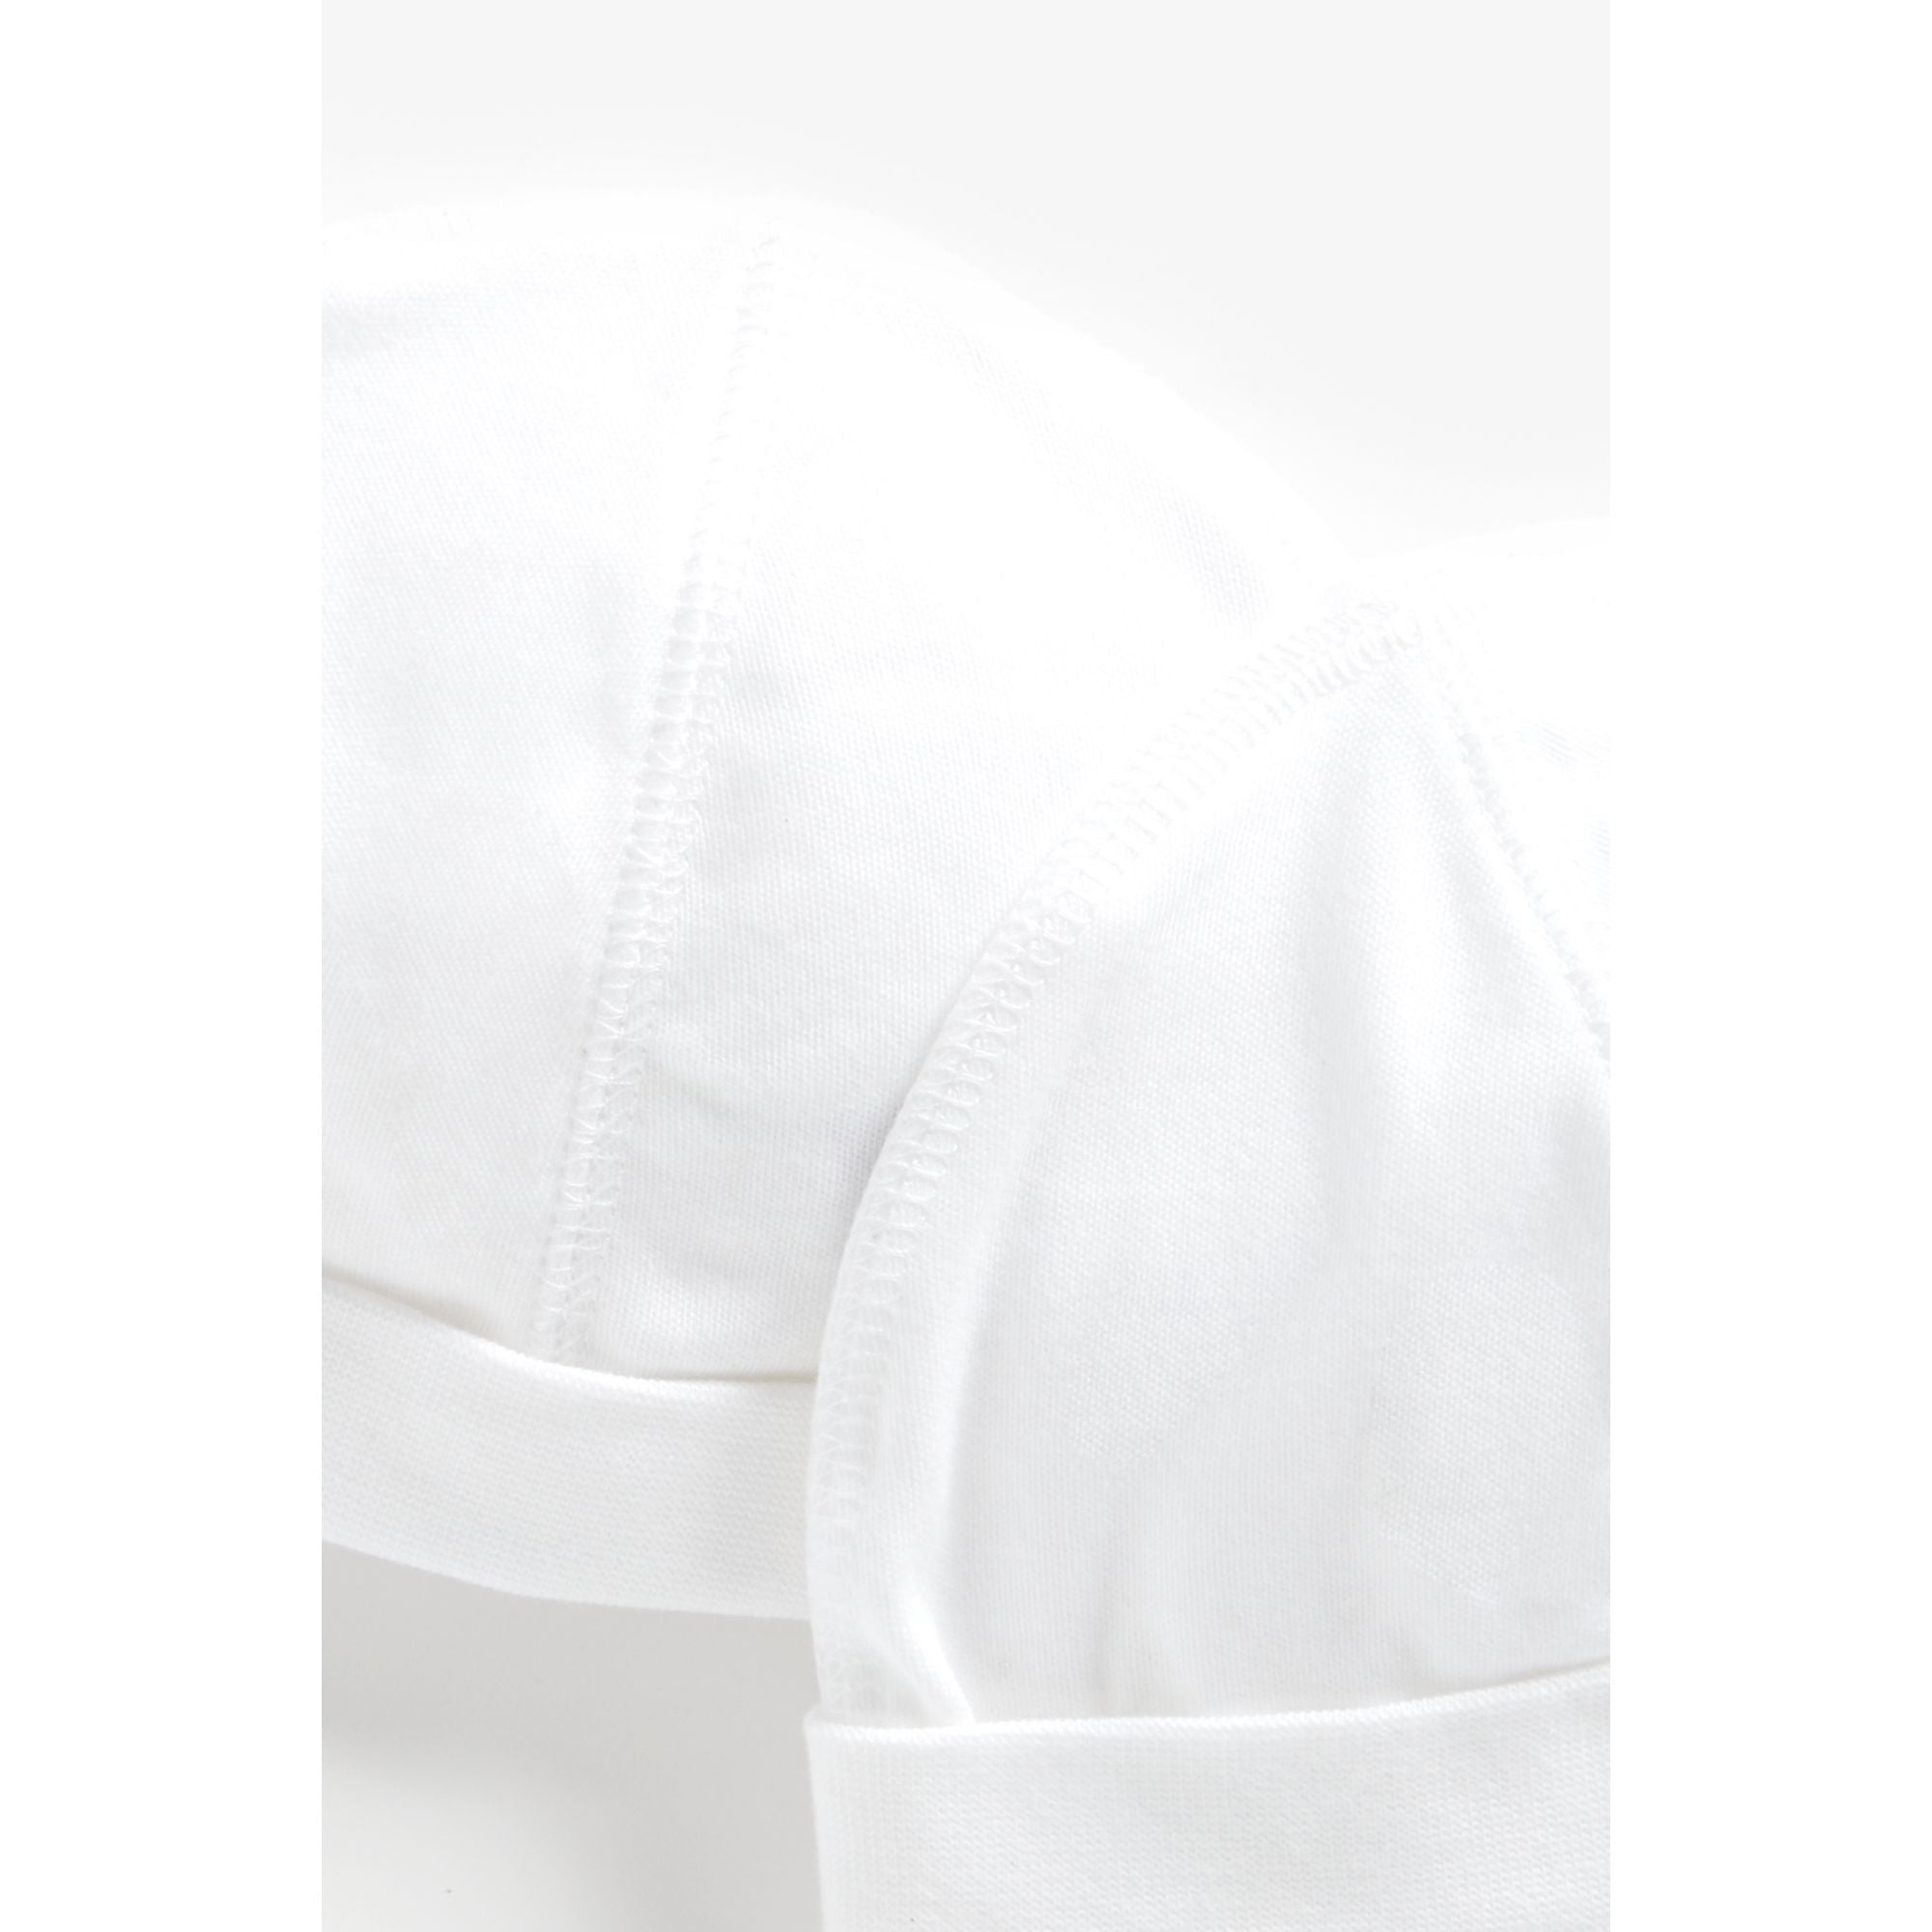 Mothercare White Hats - 2 Pack